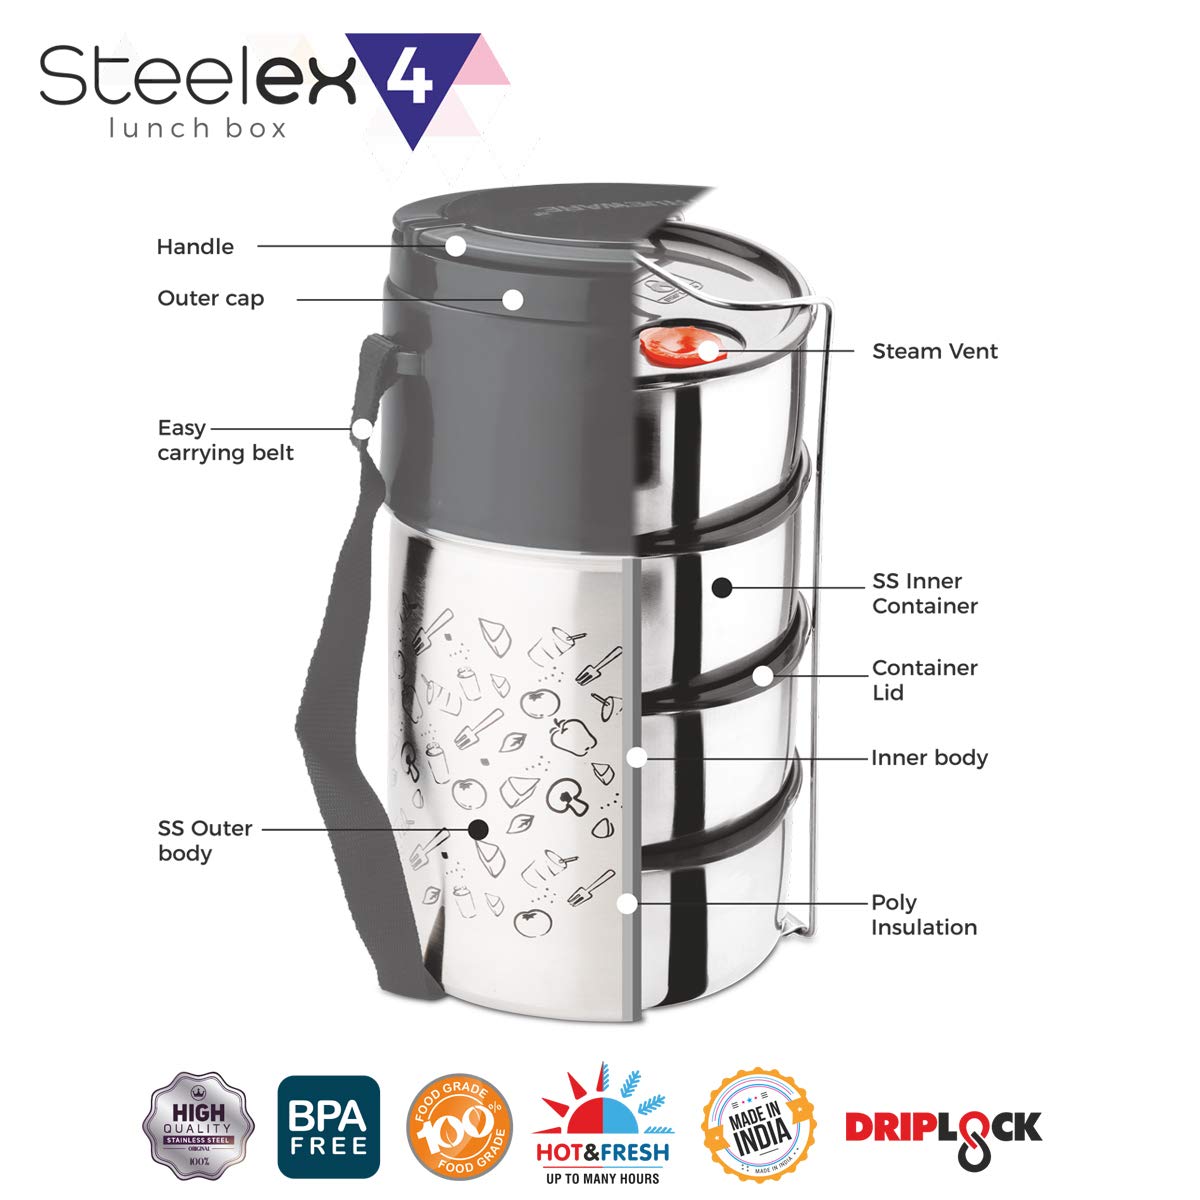 Trueware Steelex 4 Lunch Box, Stainless Steel Each 350ml 4Container, Insulated Lunch Carrier, 1piece